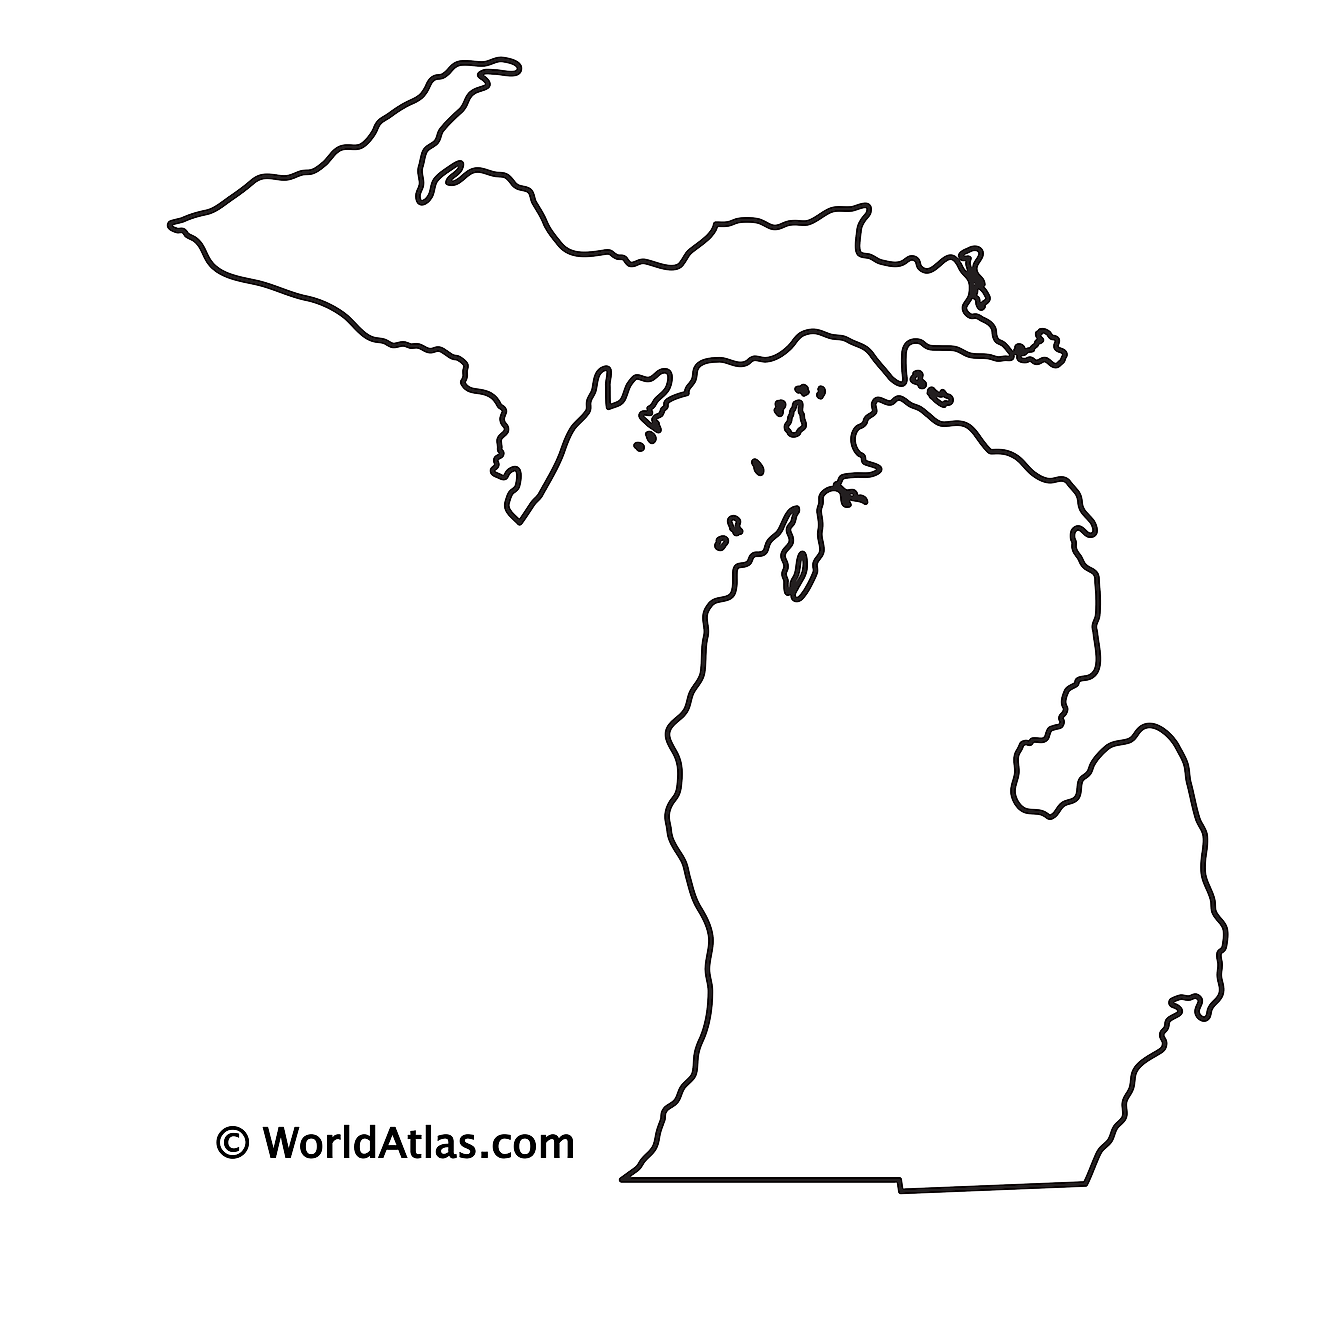 Blank outline map of Michigan